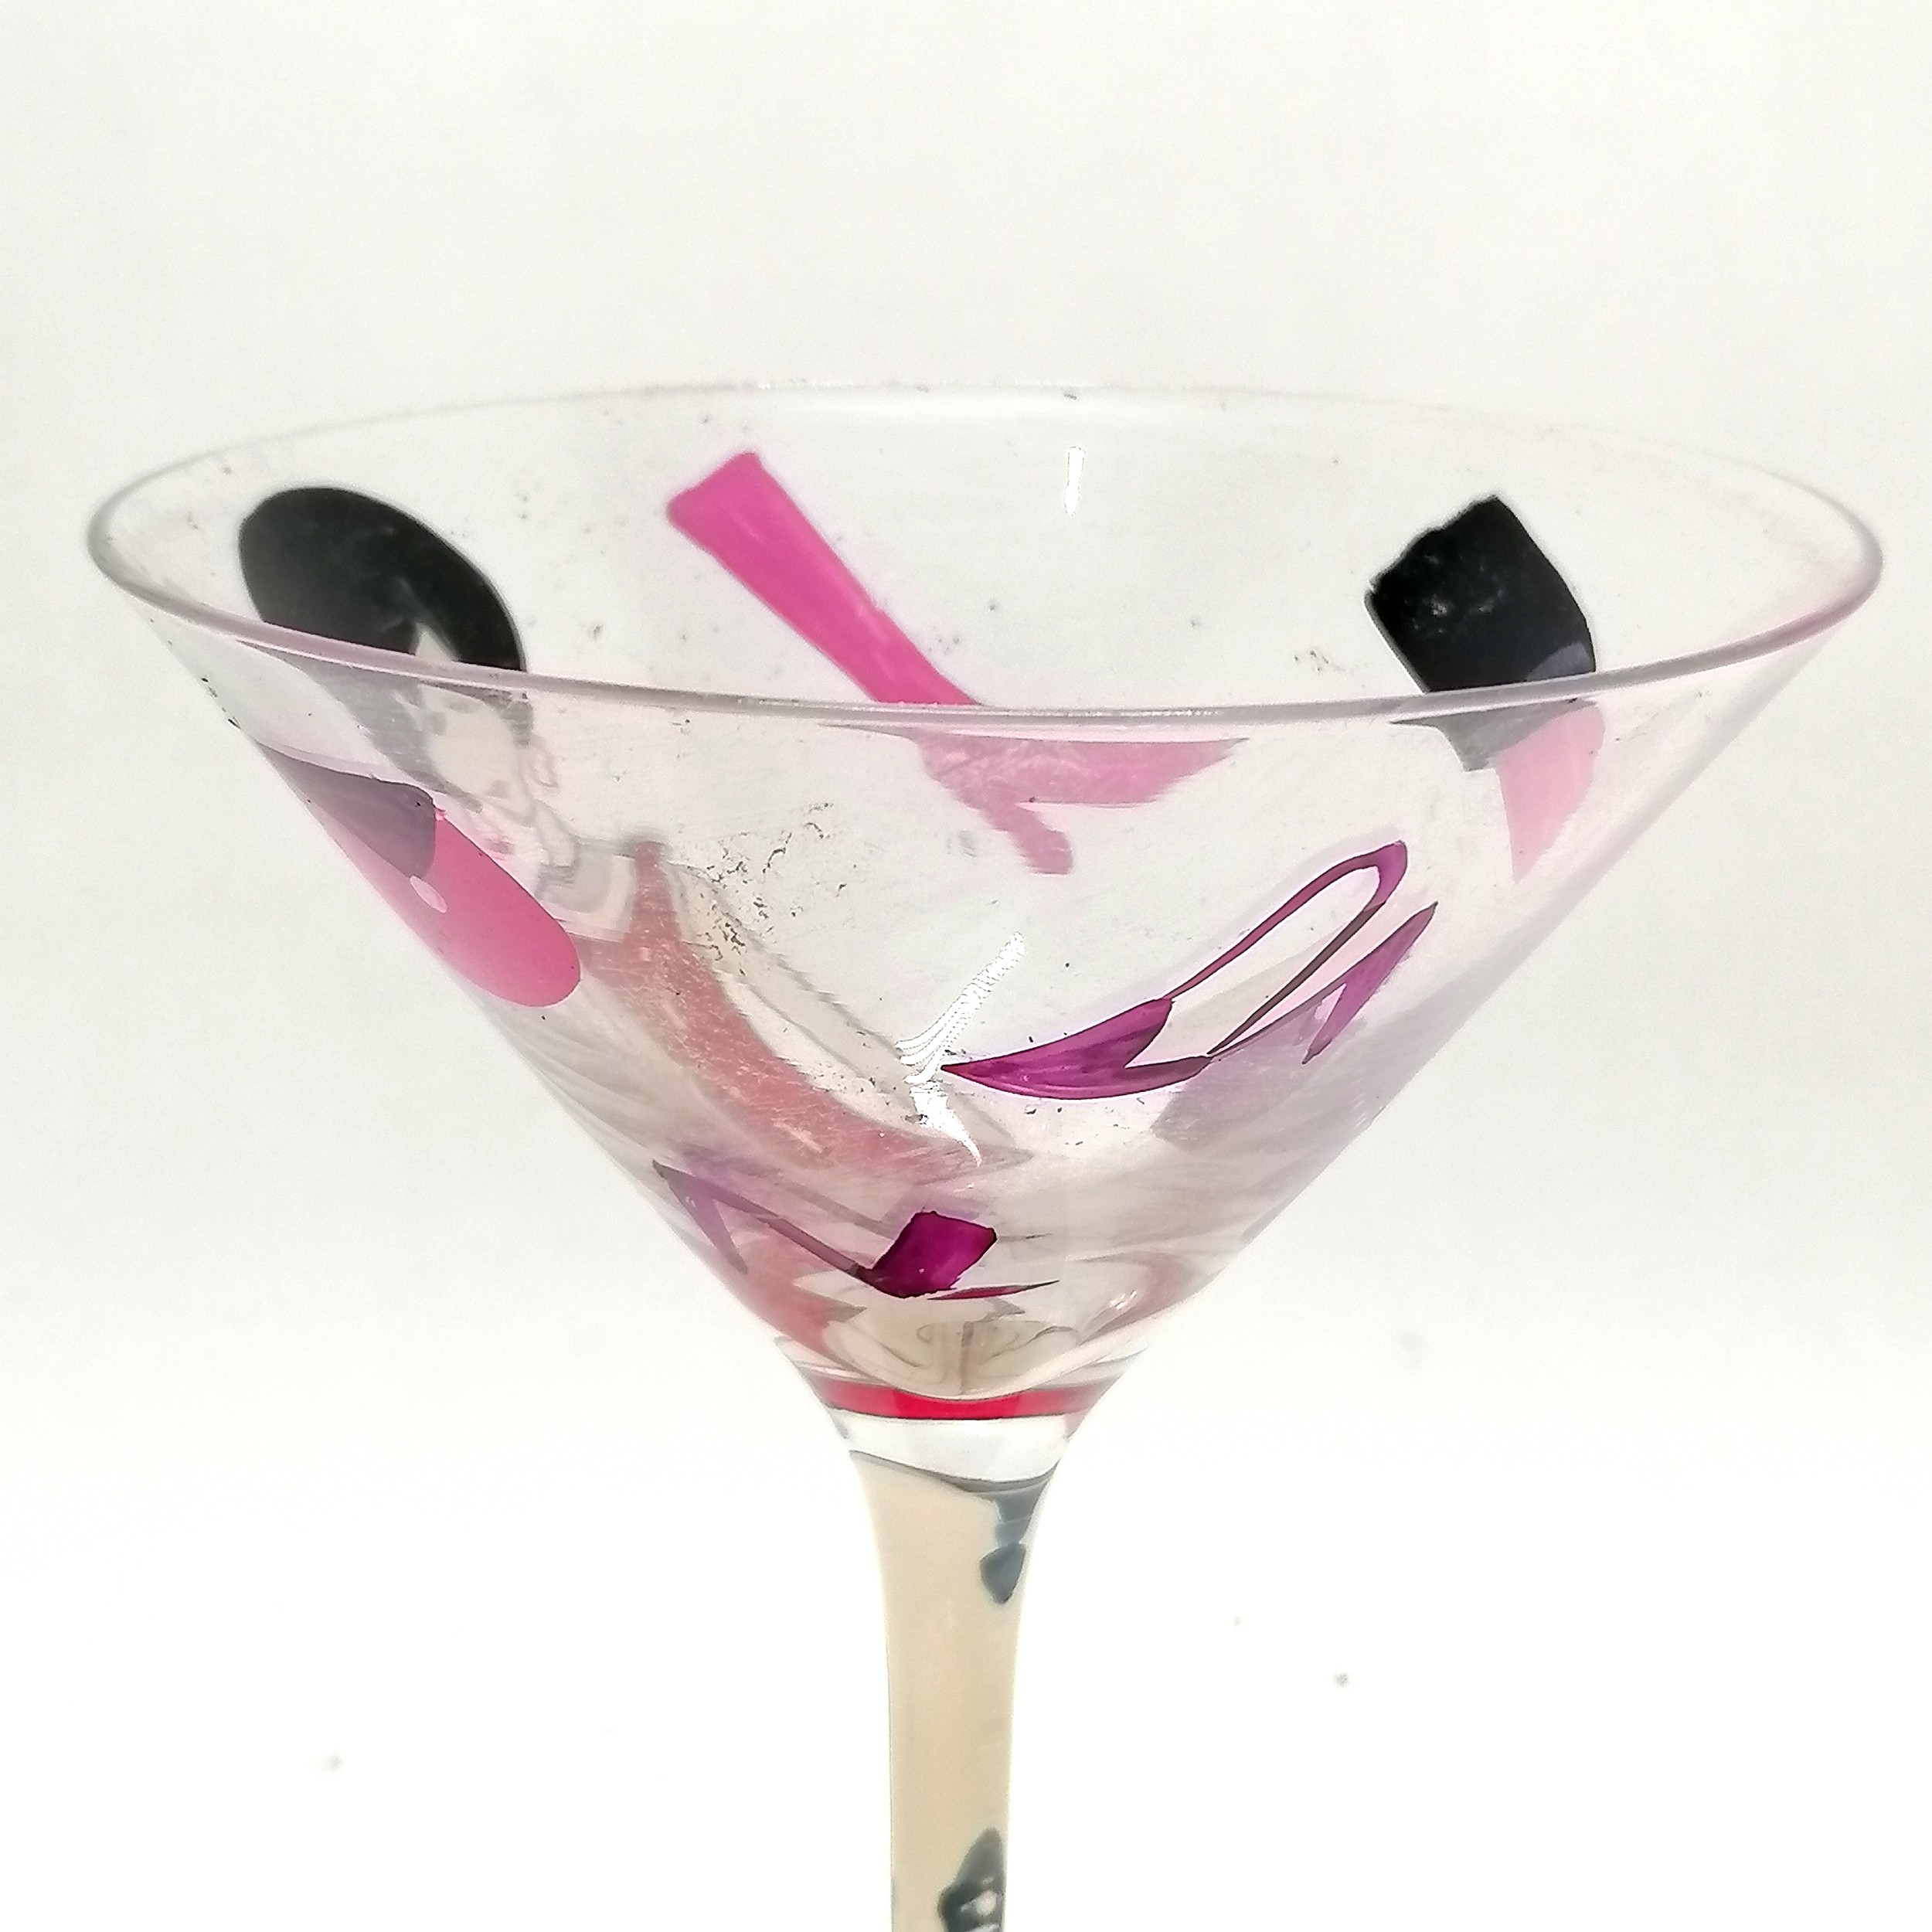 Pair of novelty cocktail glasses with hand decorated 1960's fashion - 19cm high x 12cm diameter - Image 4 of 5